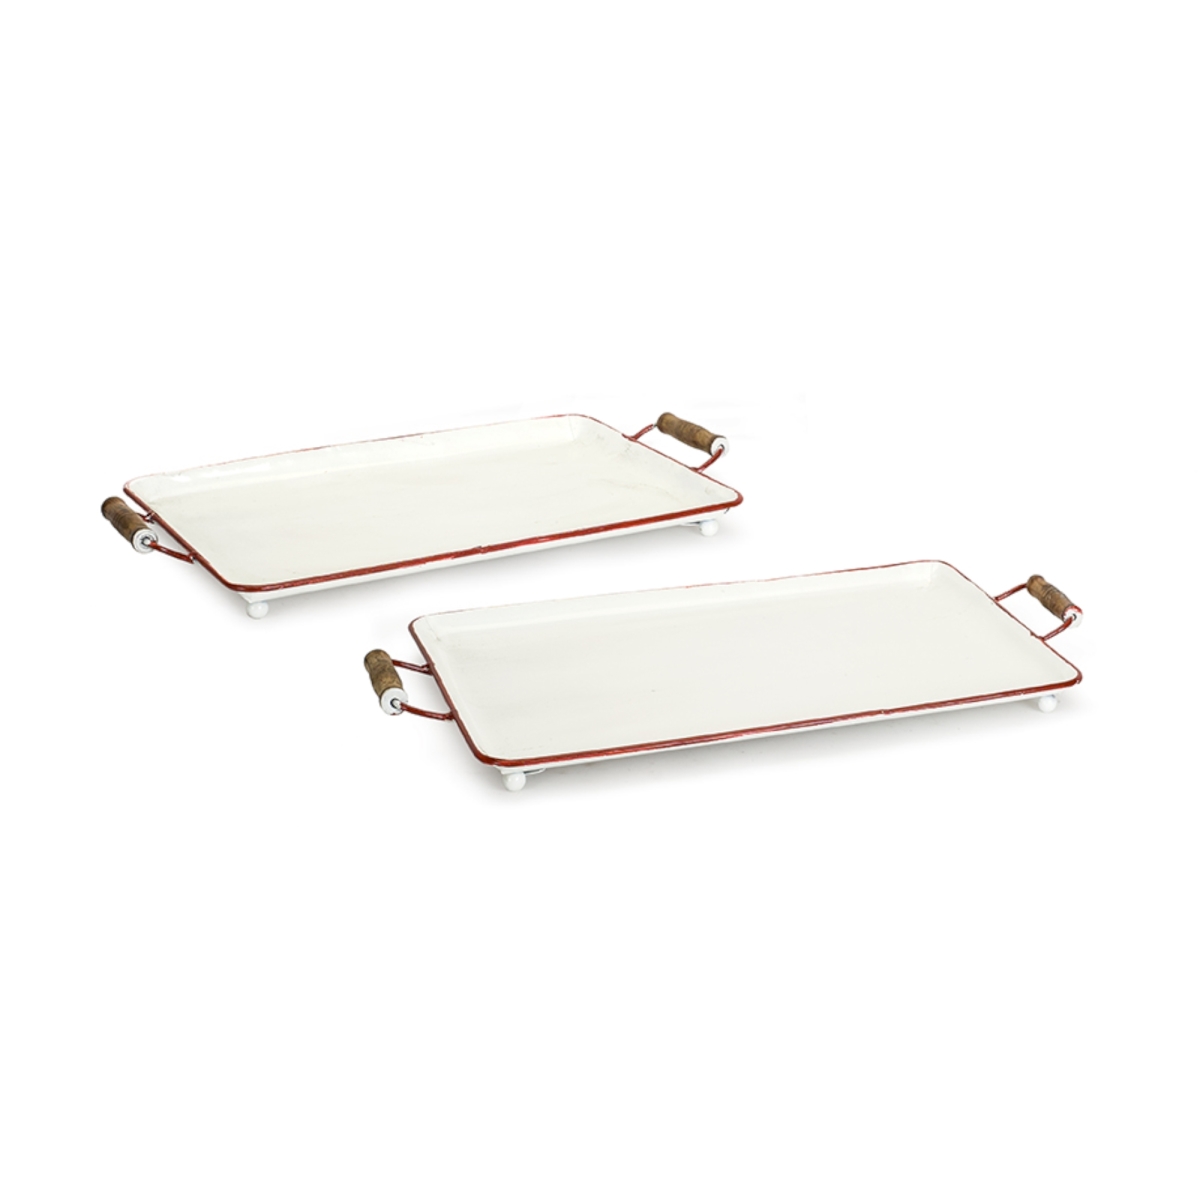 72198ds 23 X 20.5 In. Metal Tray, White & Red - Set Of 2